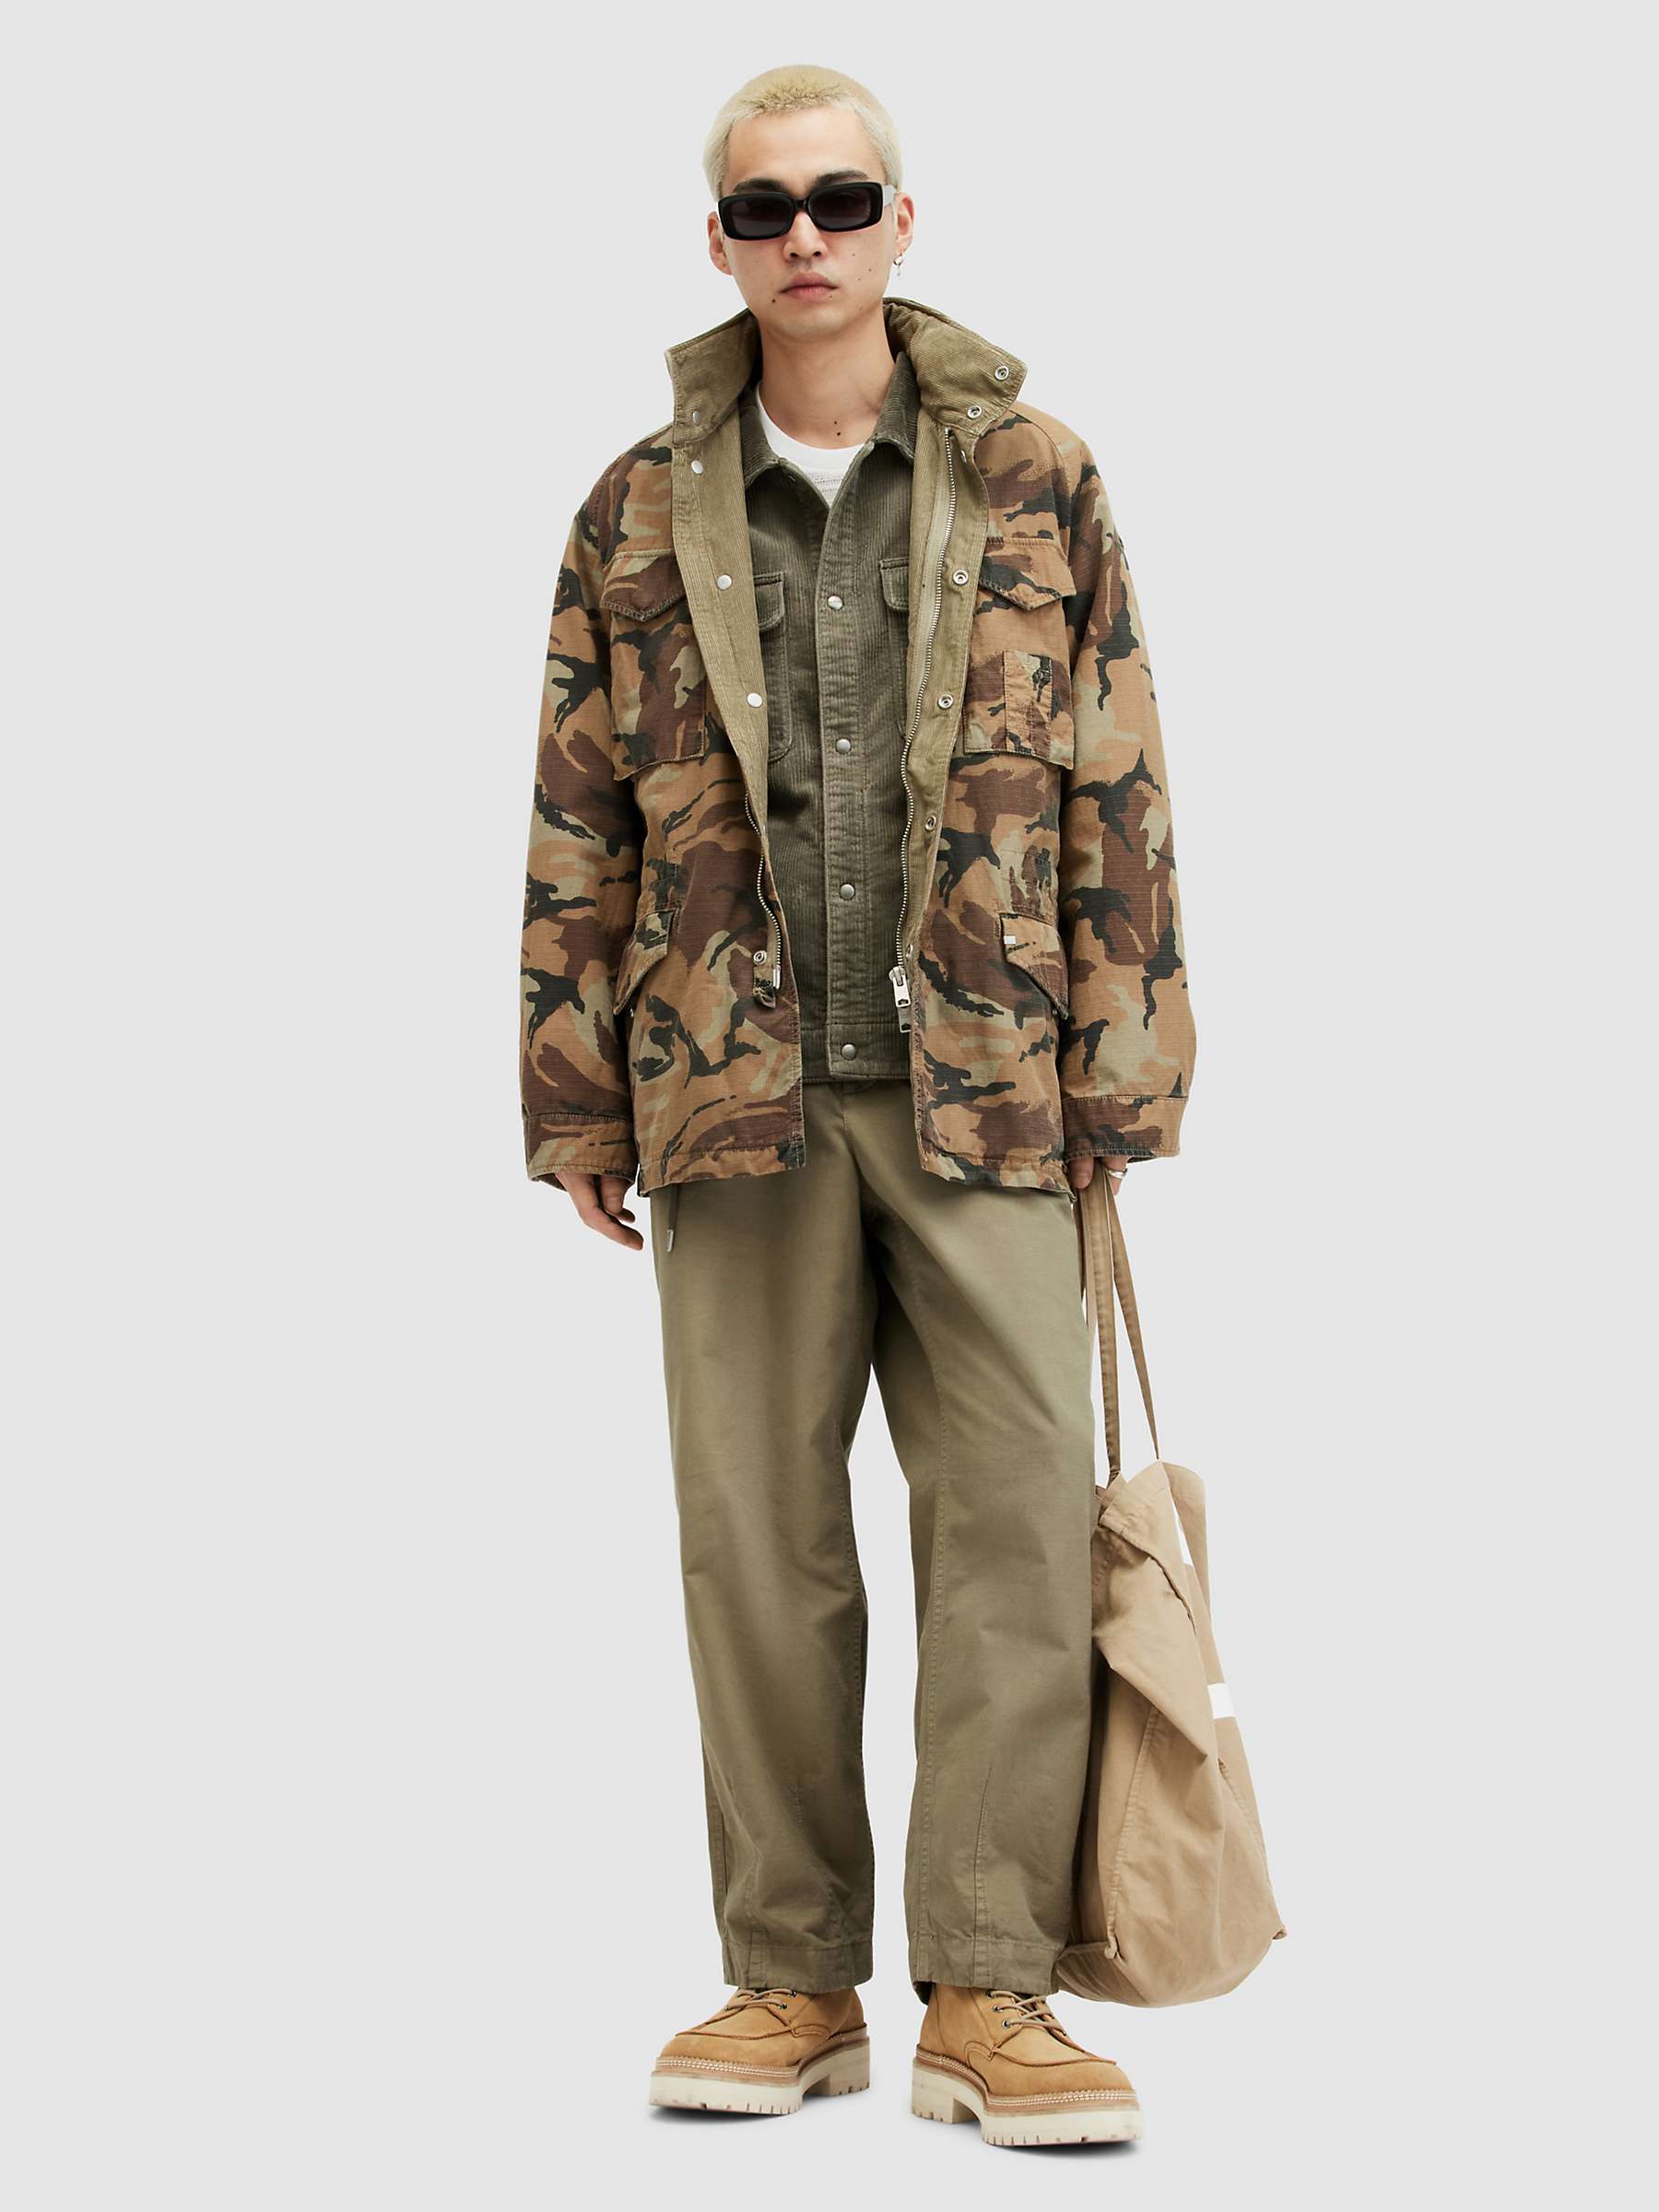 Buy AllSaints Buck Trousers, Military Green Online at johnlewis.com